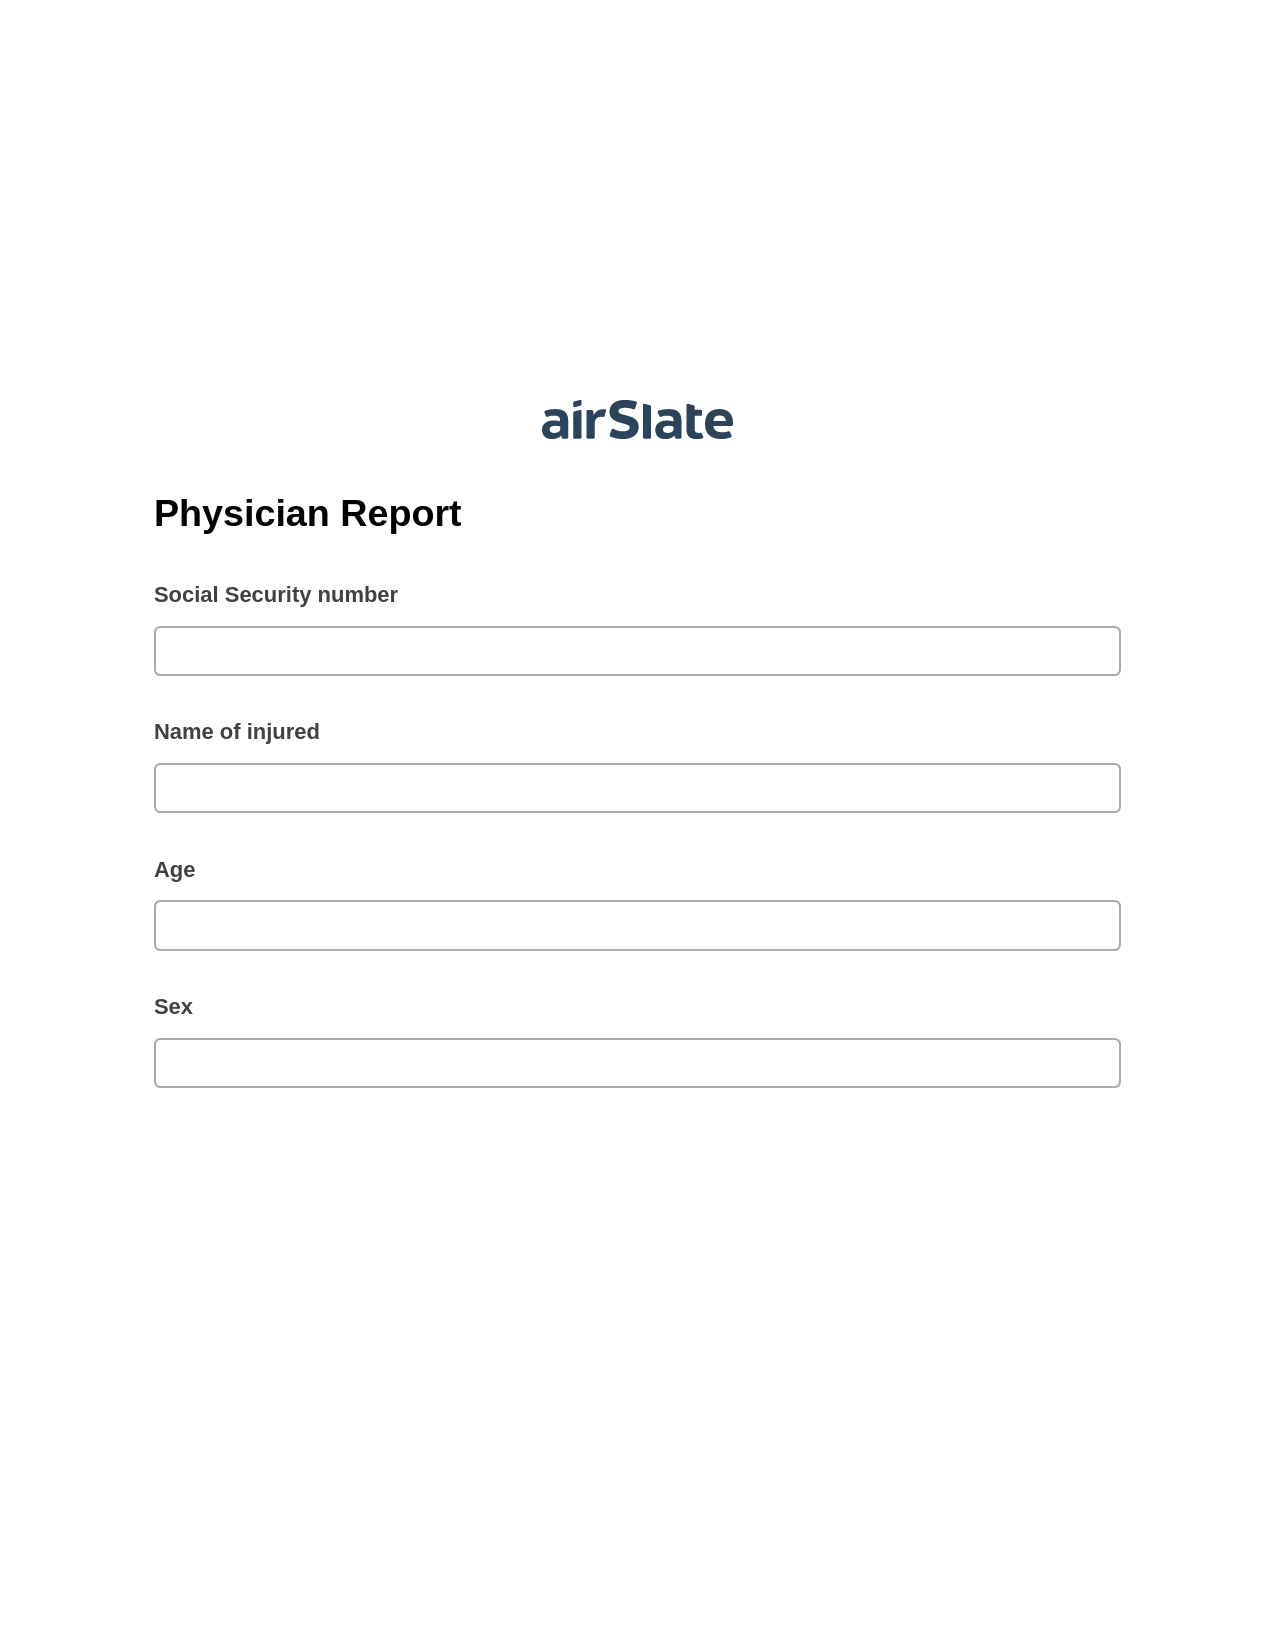 Physician Report Pre-fill from MS Dynamics 365 Records, Update NetSuite Record Bot, Archive to Dropbox Bot